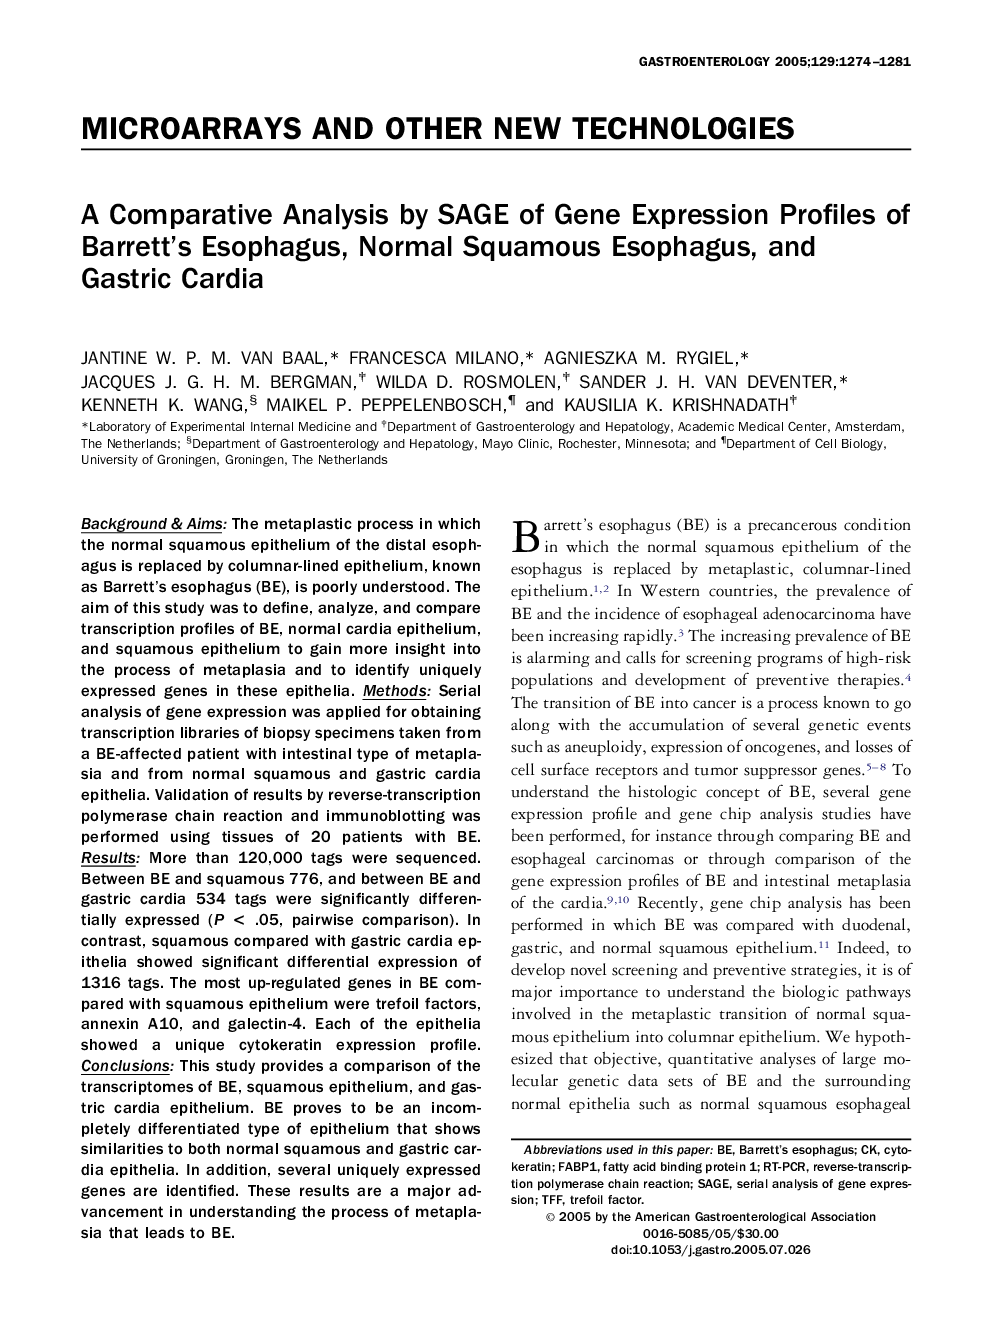 A Comparative Analysis by SAGE of Gene Expression Profiles of Barrett's Esophagus, Normal Squamous Esophagus, and Gastric Cardia